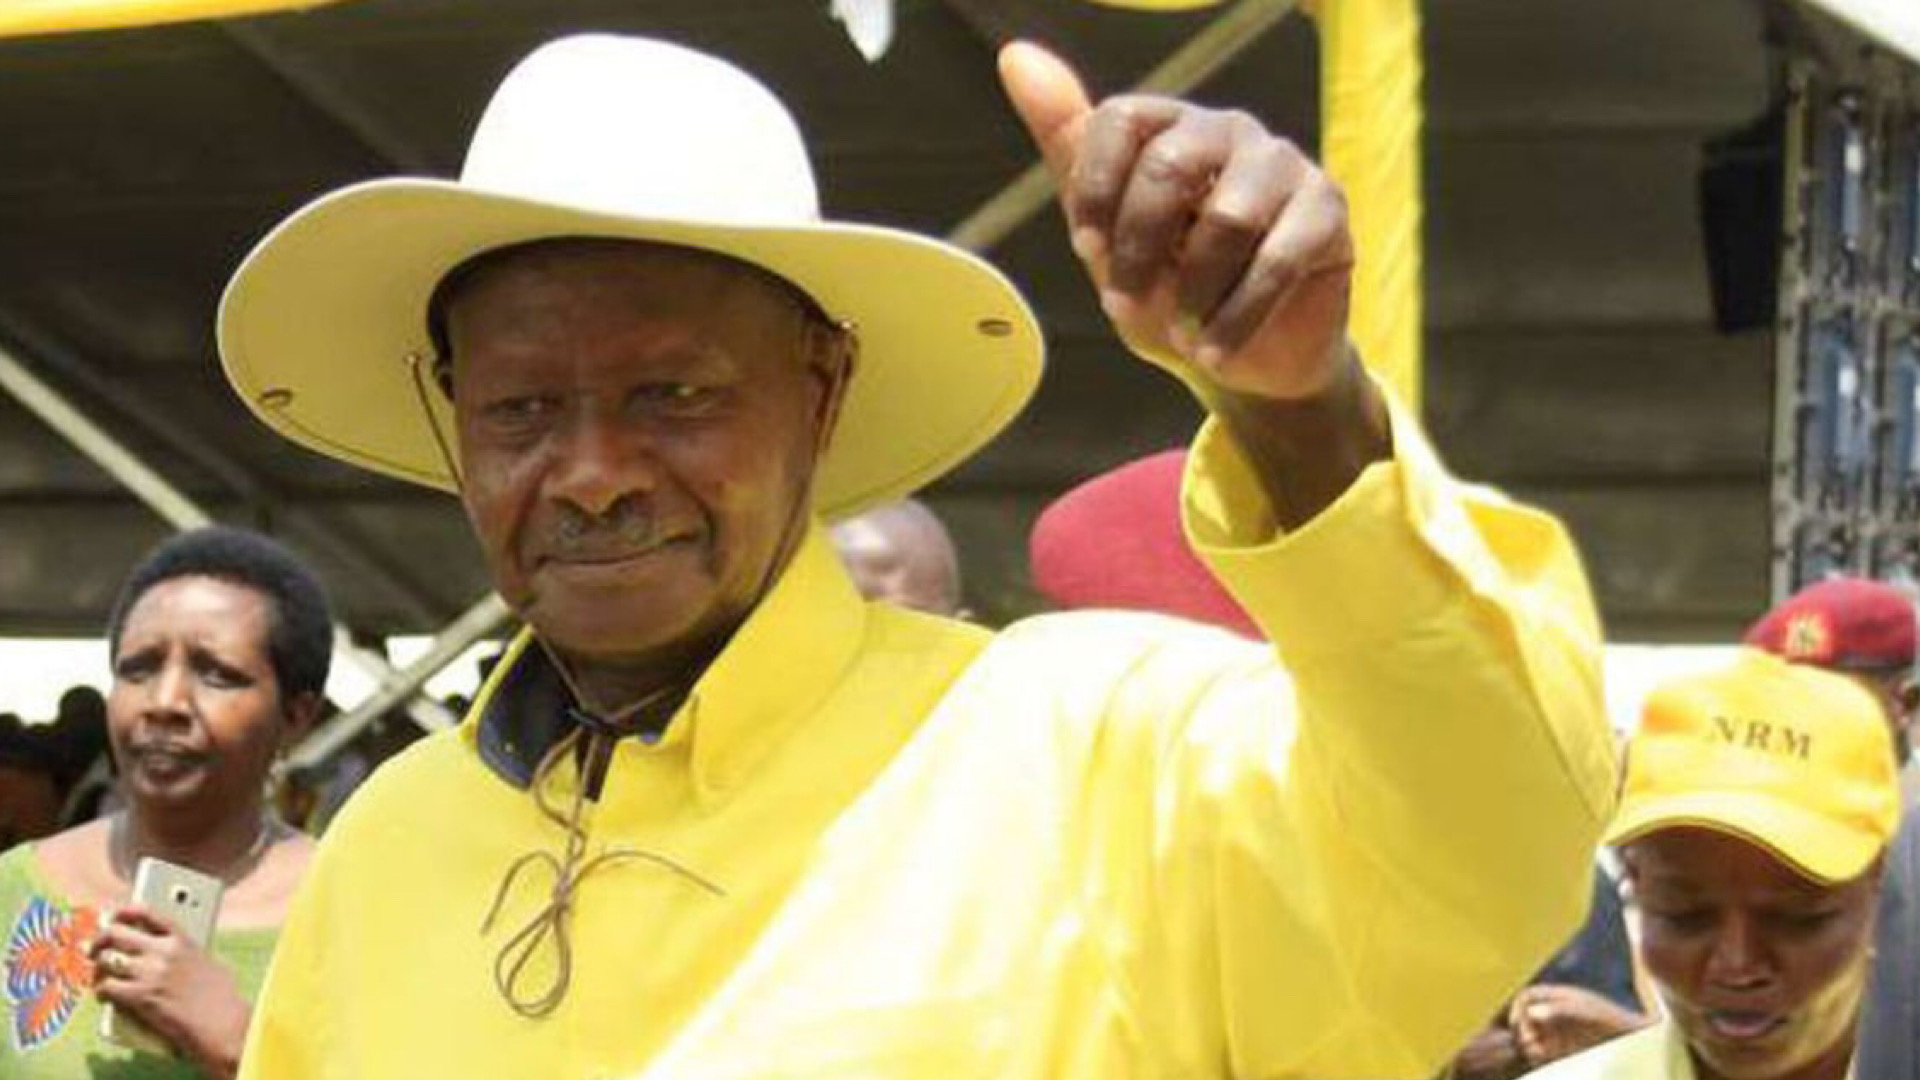 Museveni pledges to concede defeat if elections are fair